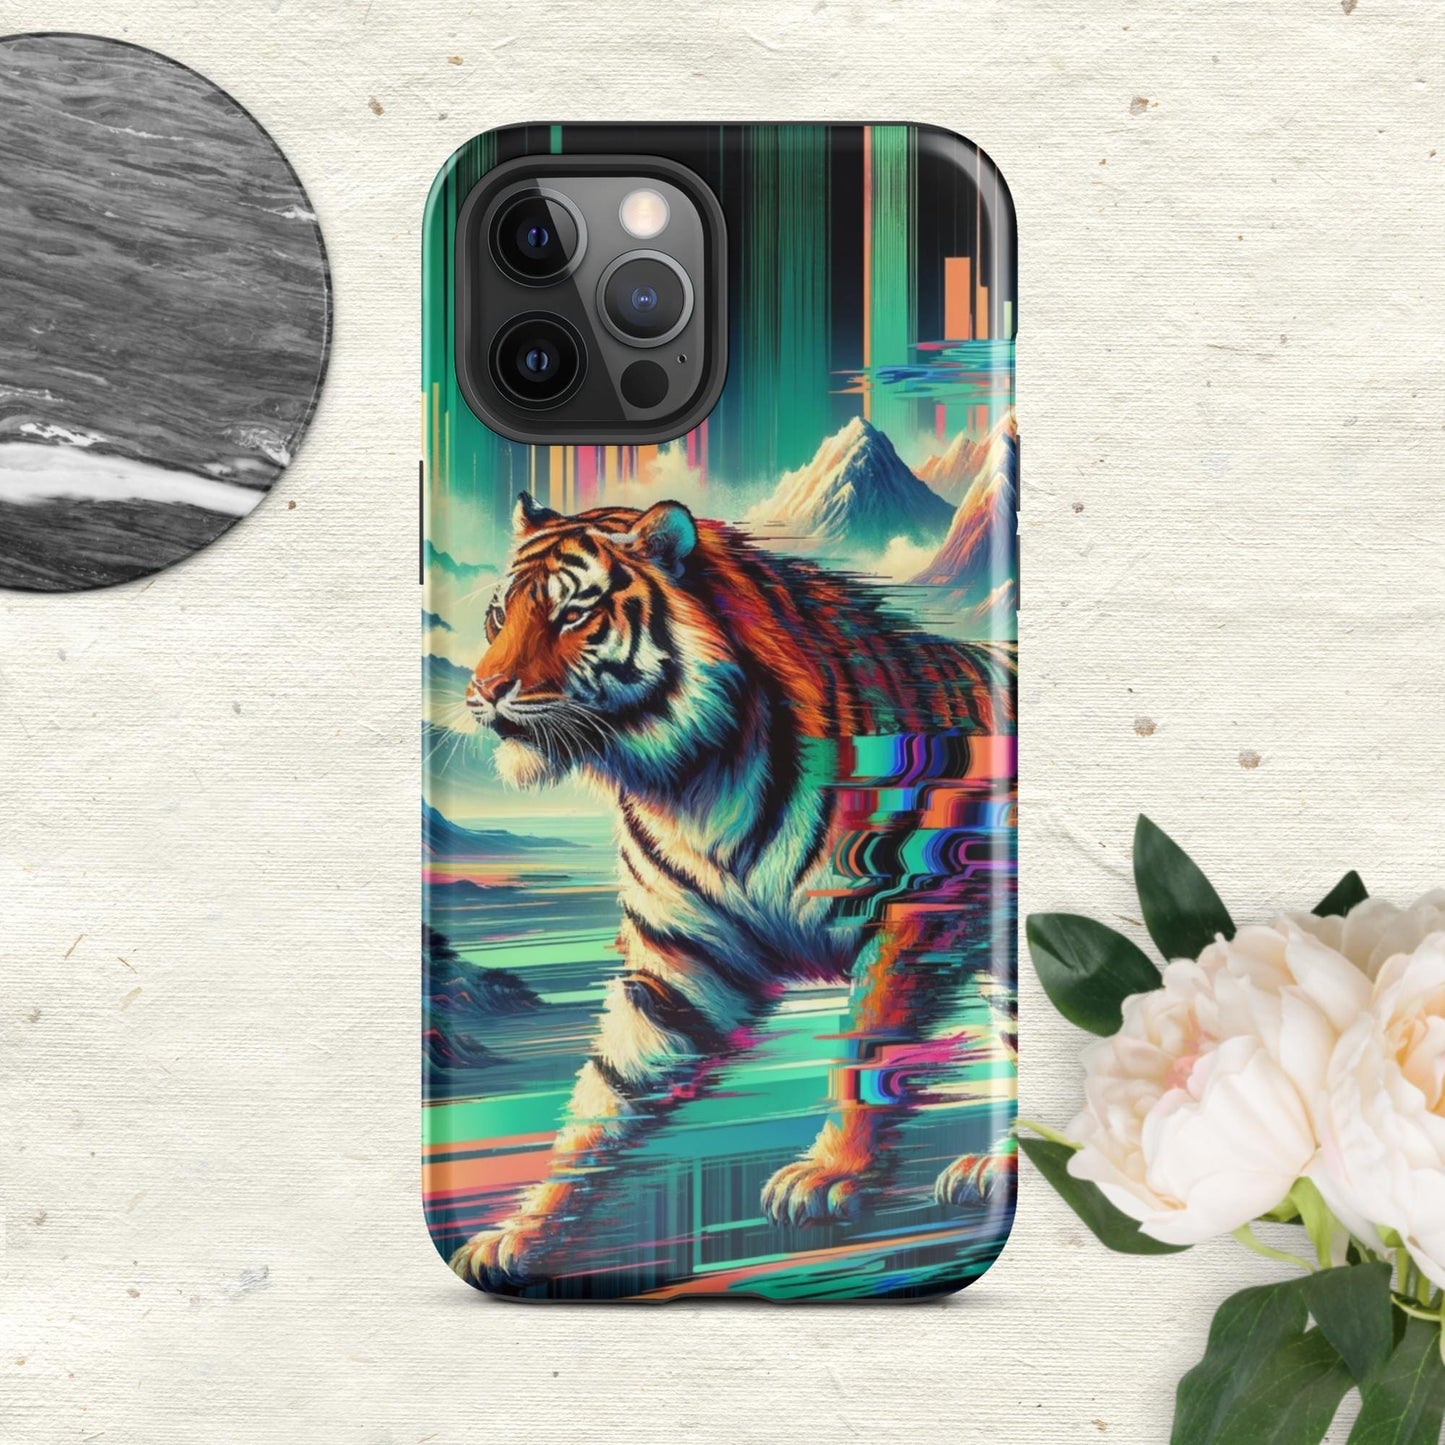 The Hologram Hook Up Glossy / iPhone 12 Pro Max Tiger Glitch Tough Case for iPhone®